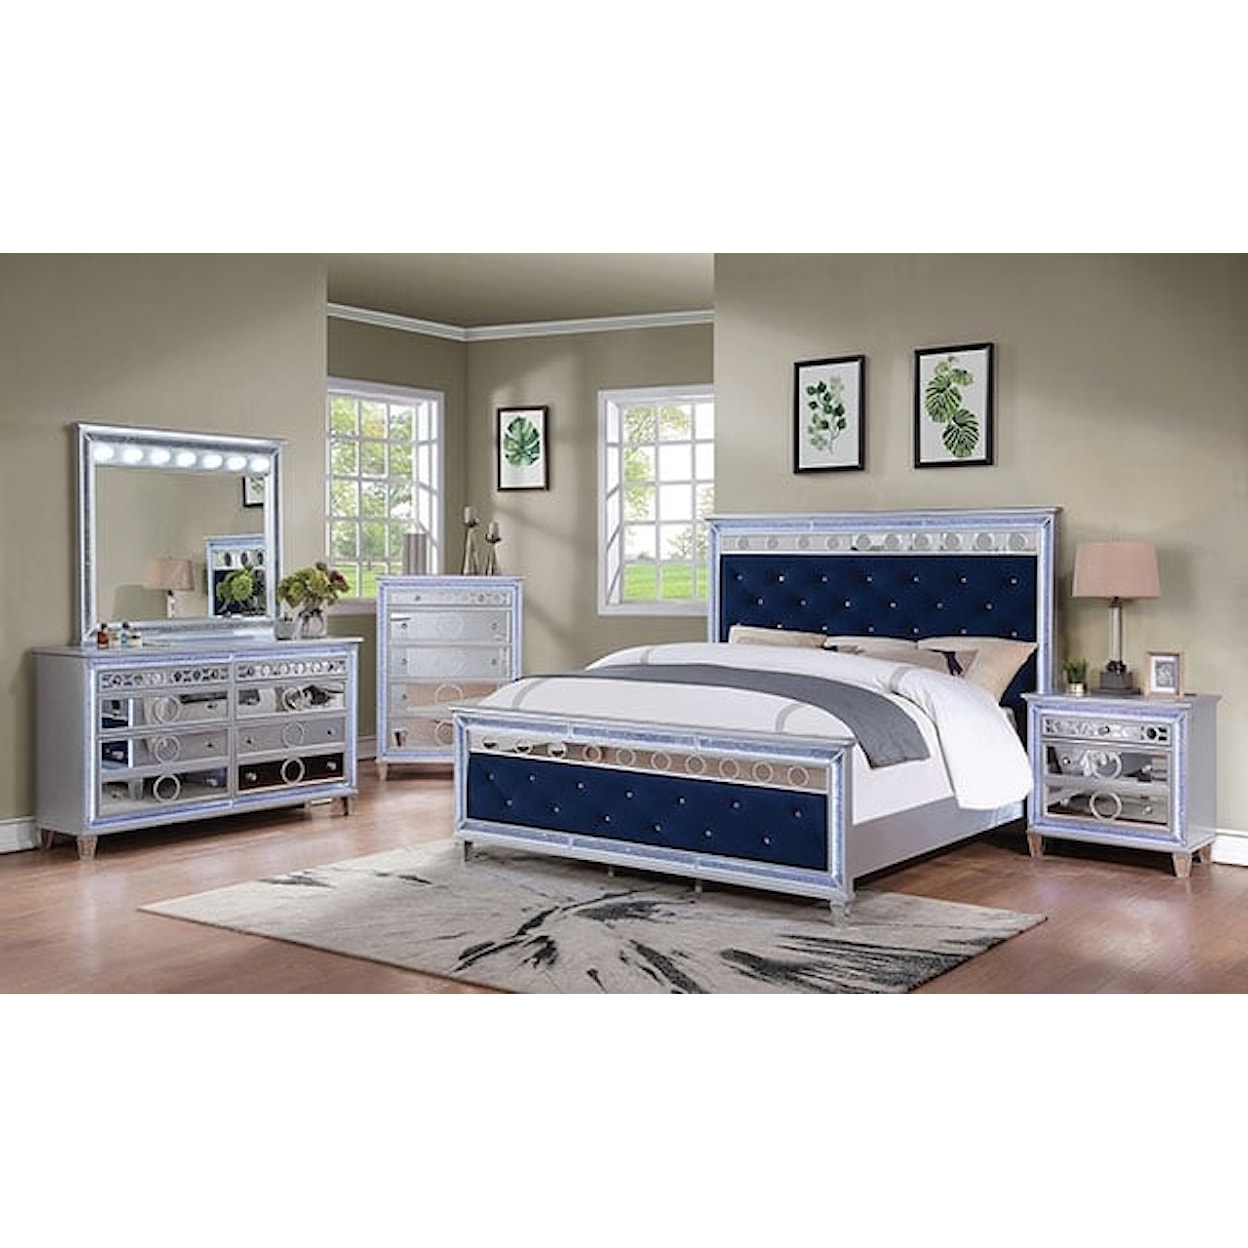 Furniture of America Mairead Upholstered Queen Bed with LED Lighting